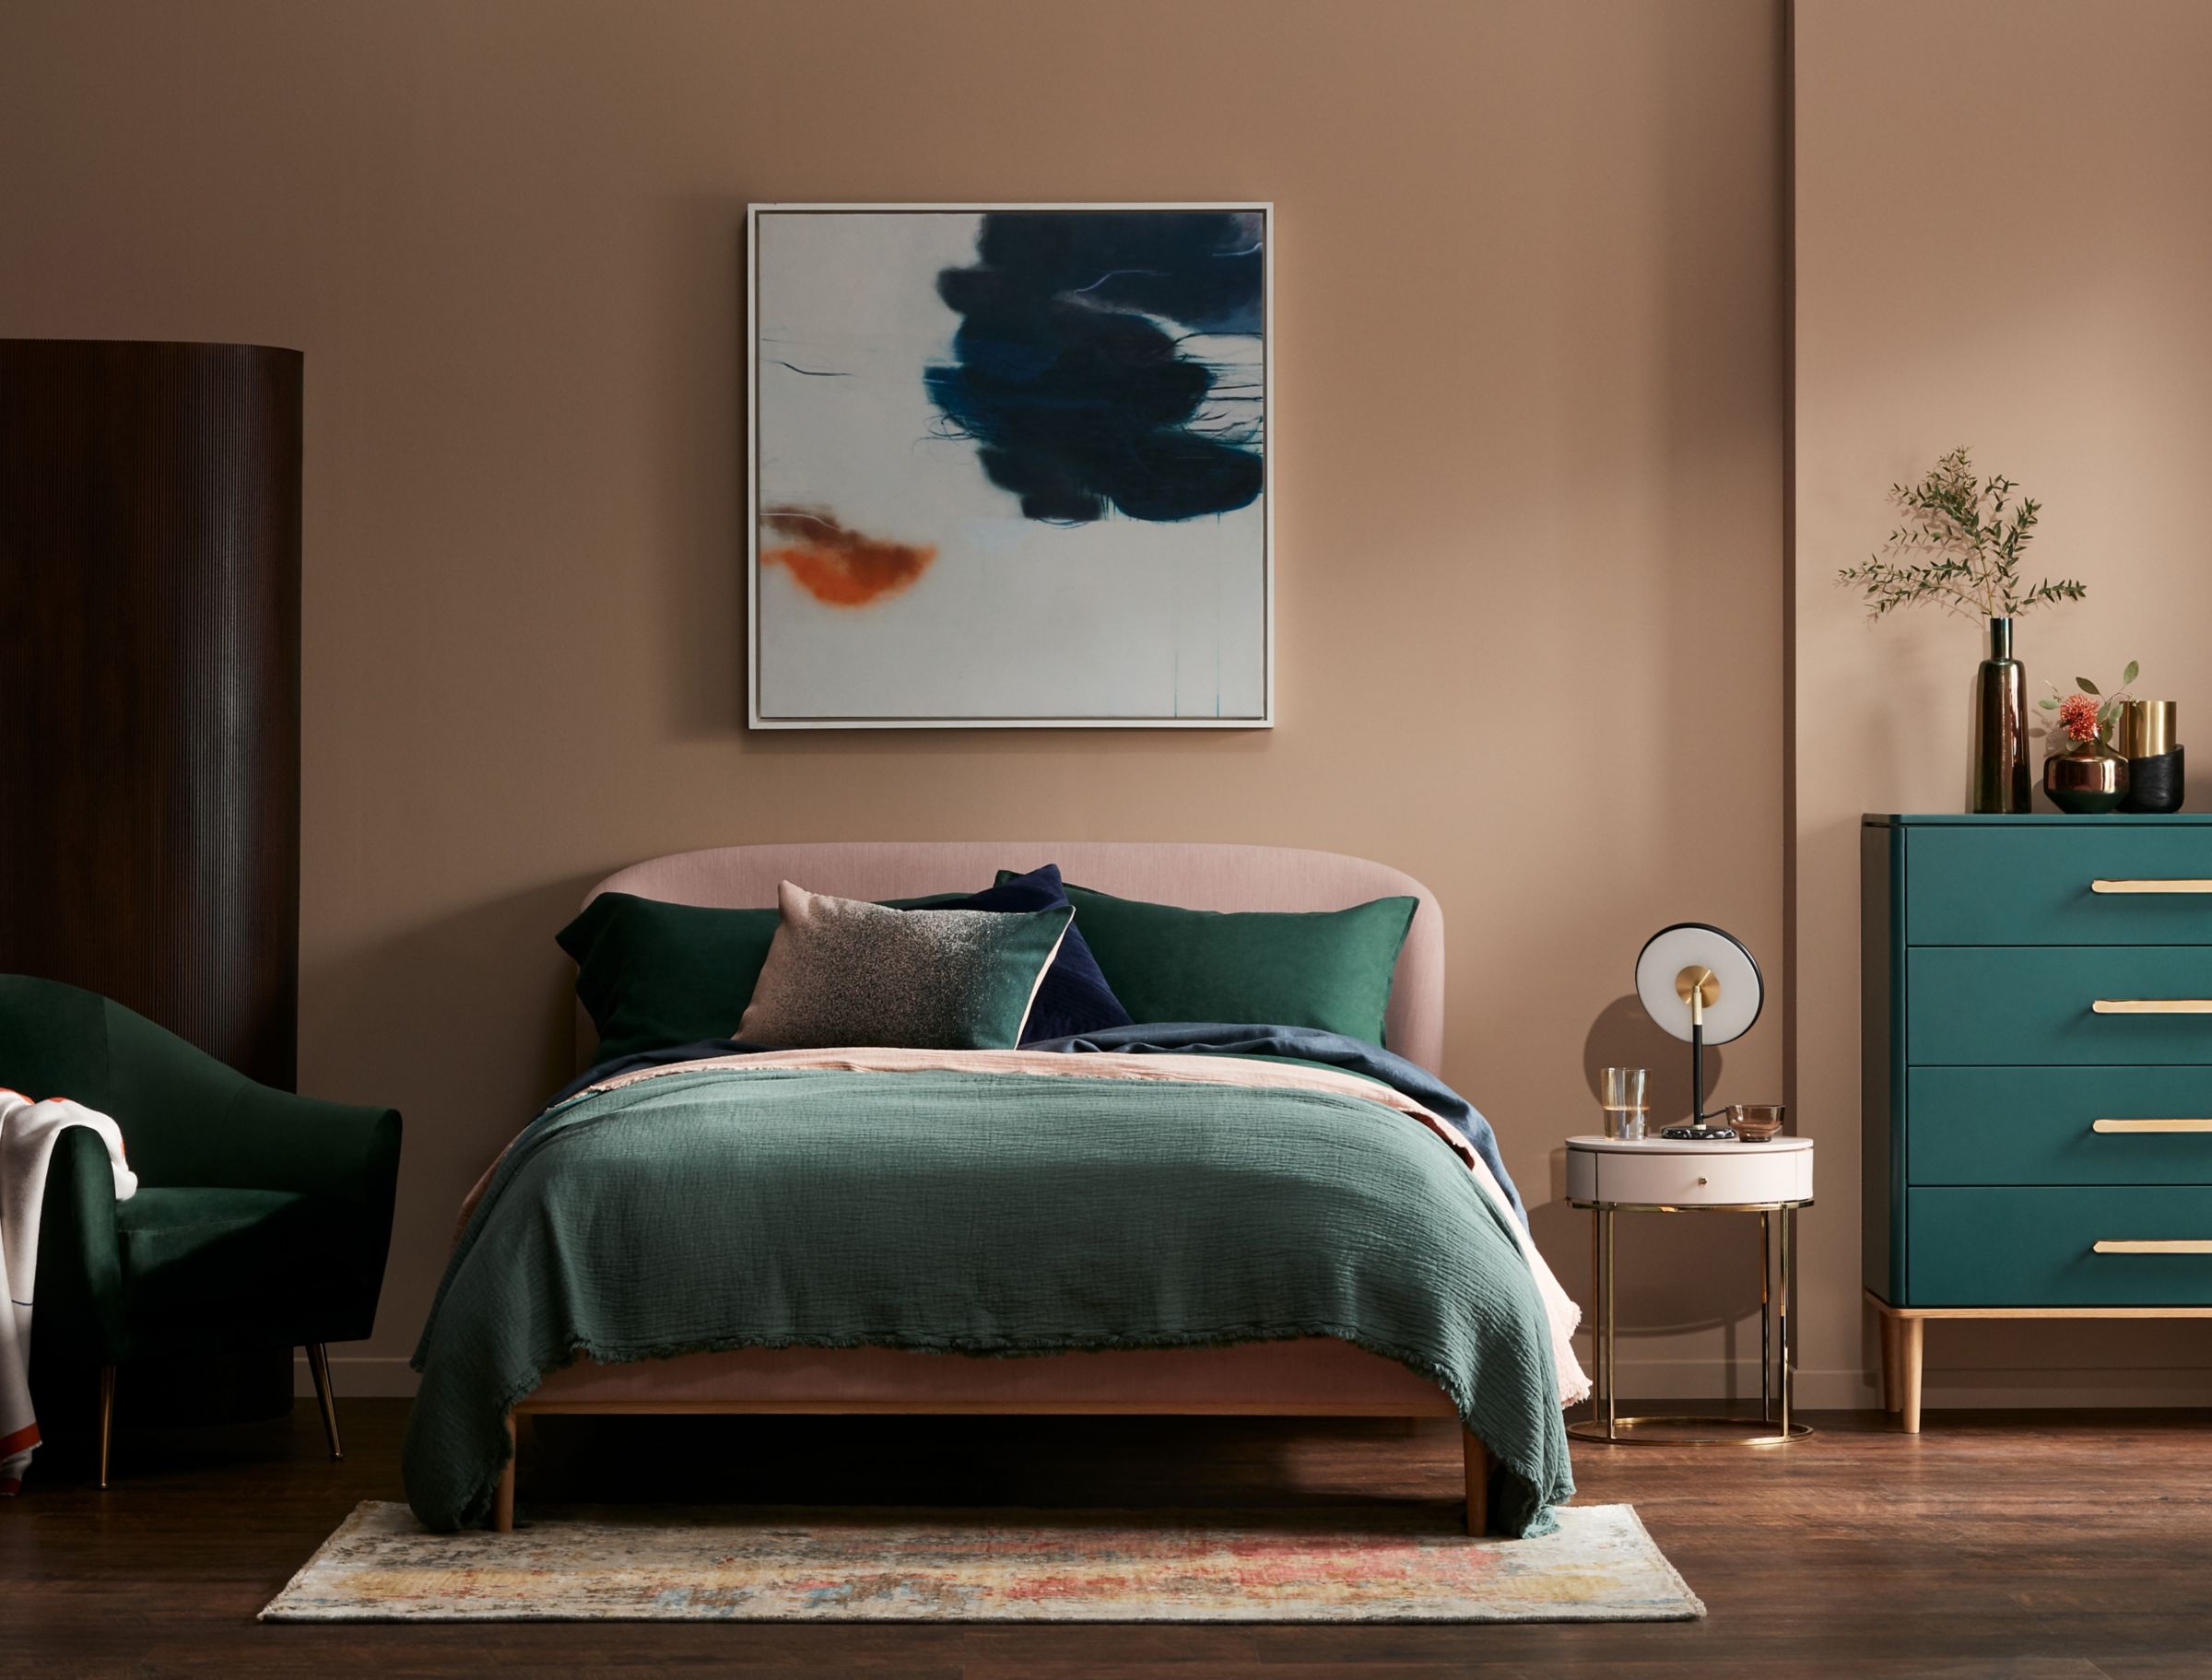 Interiors trend: why everyone’s loving forest green